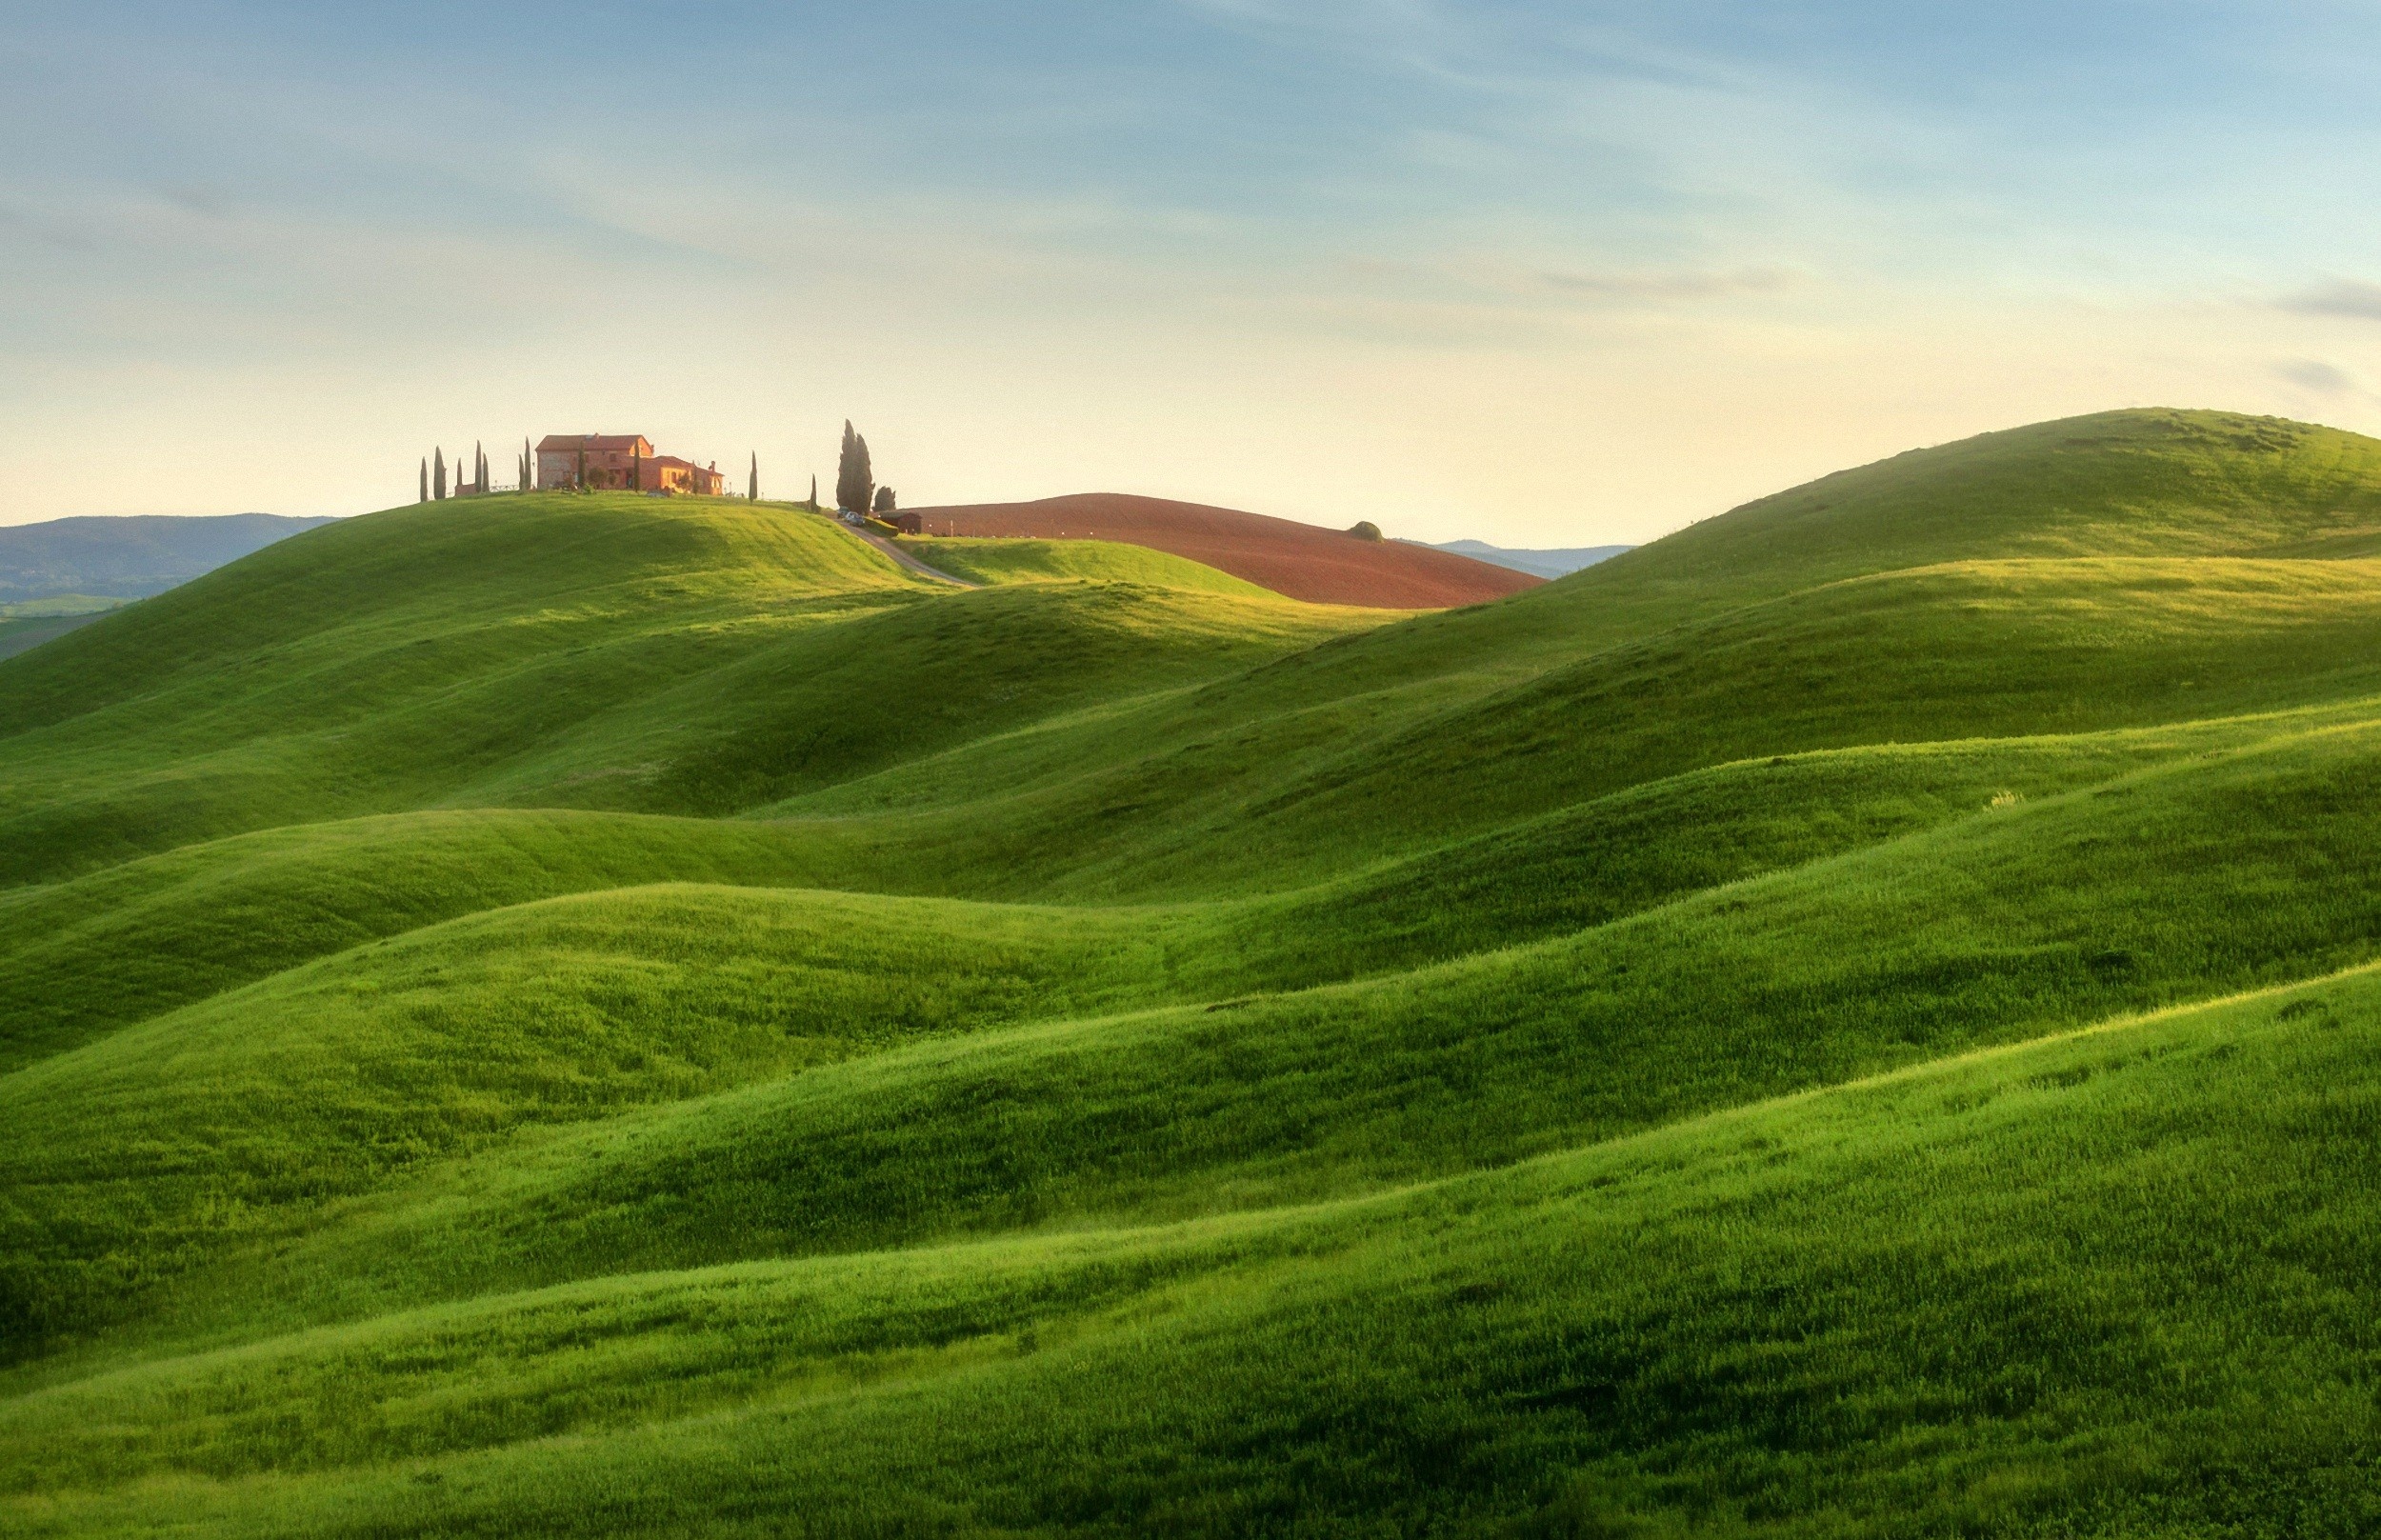 Green Hills: Tuscany region in central Italy, Italian-style country houses surrounded by green fields. 2500x1620 HD Wallpaper.